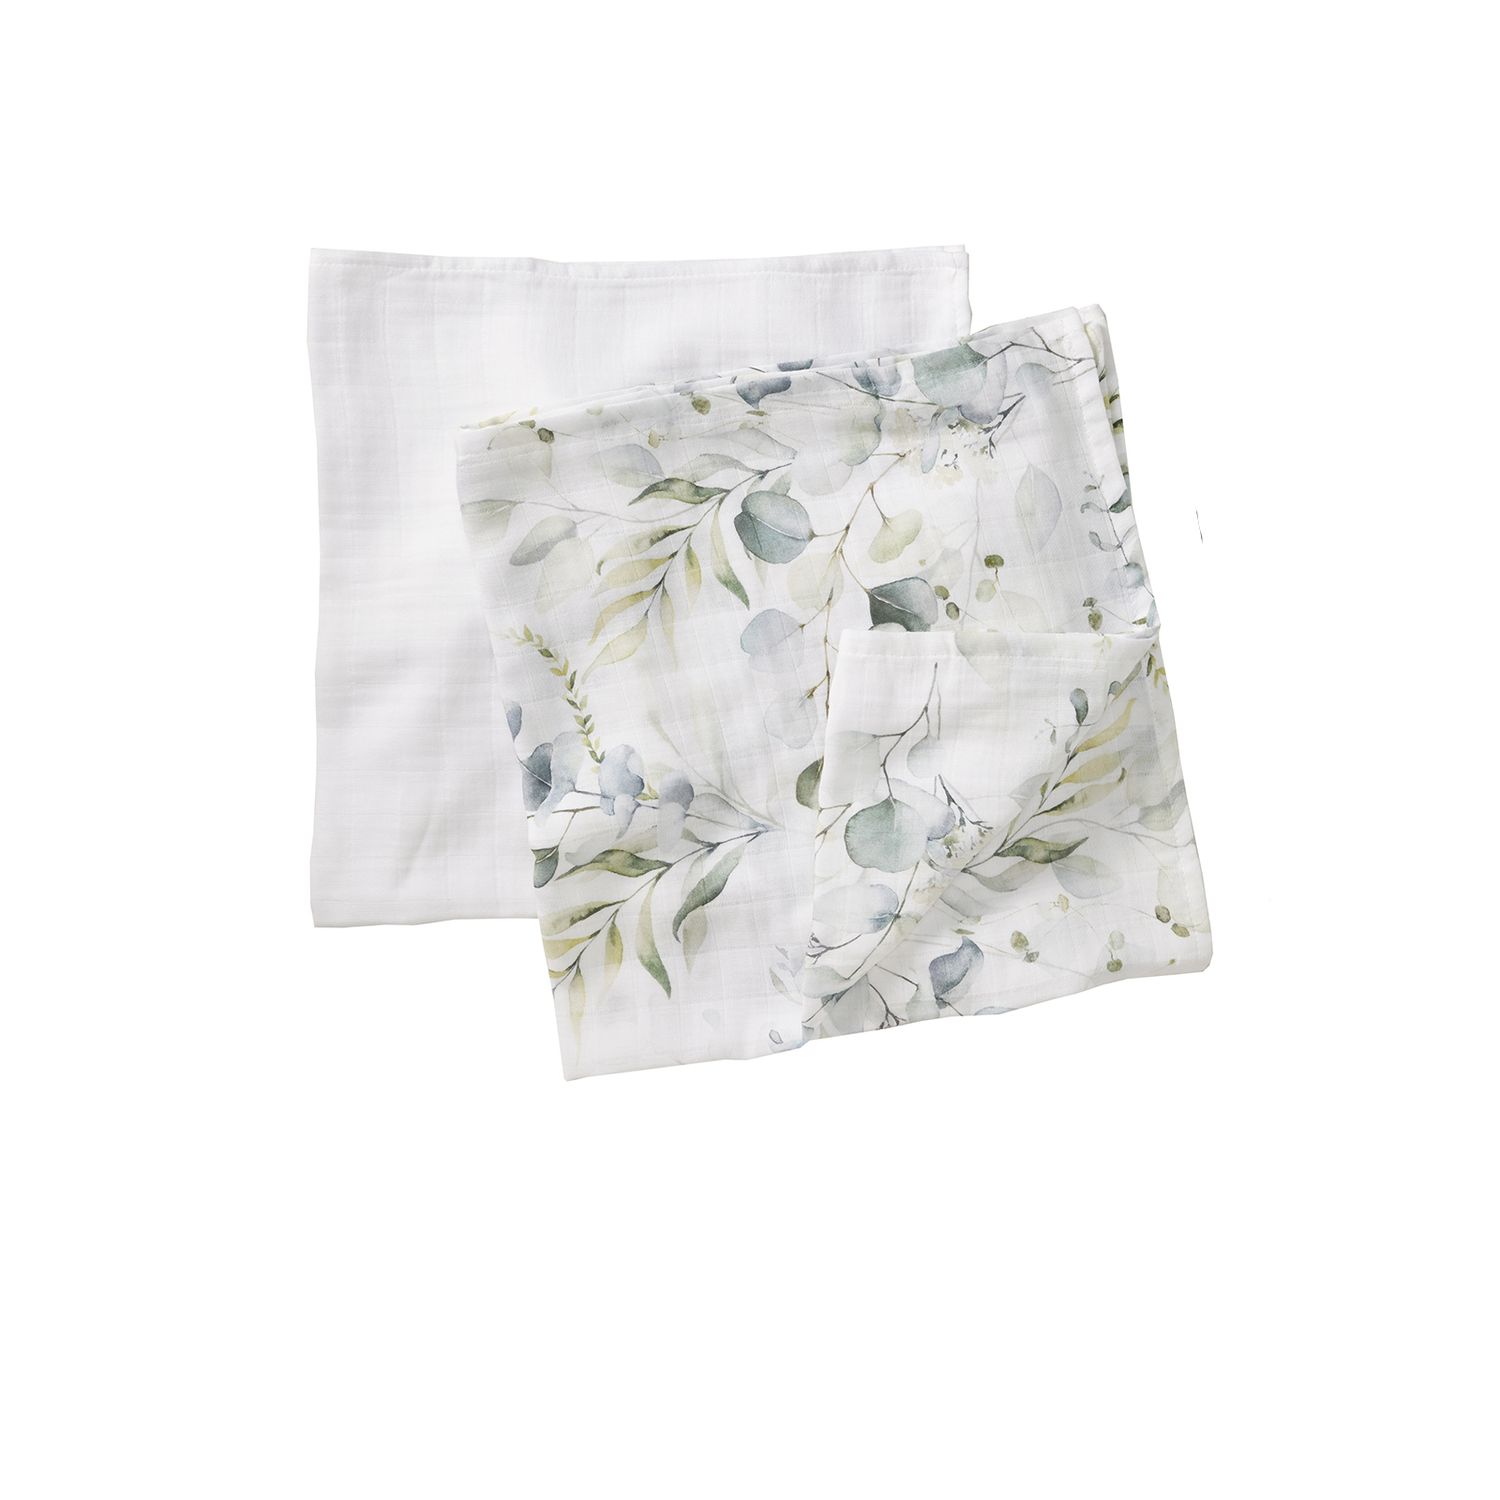 Muslin cloths set of 2 white/Natural Leaves